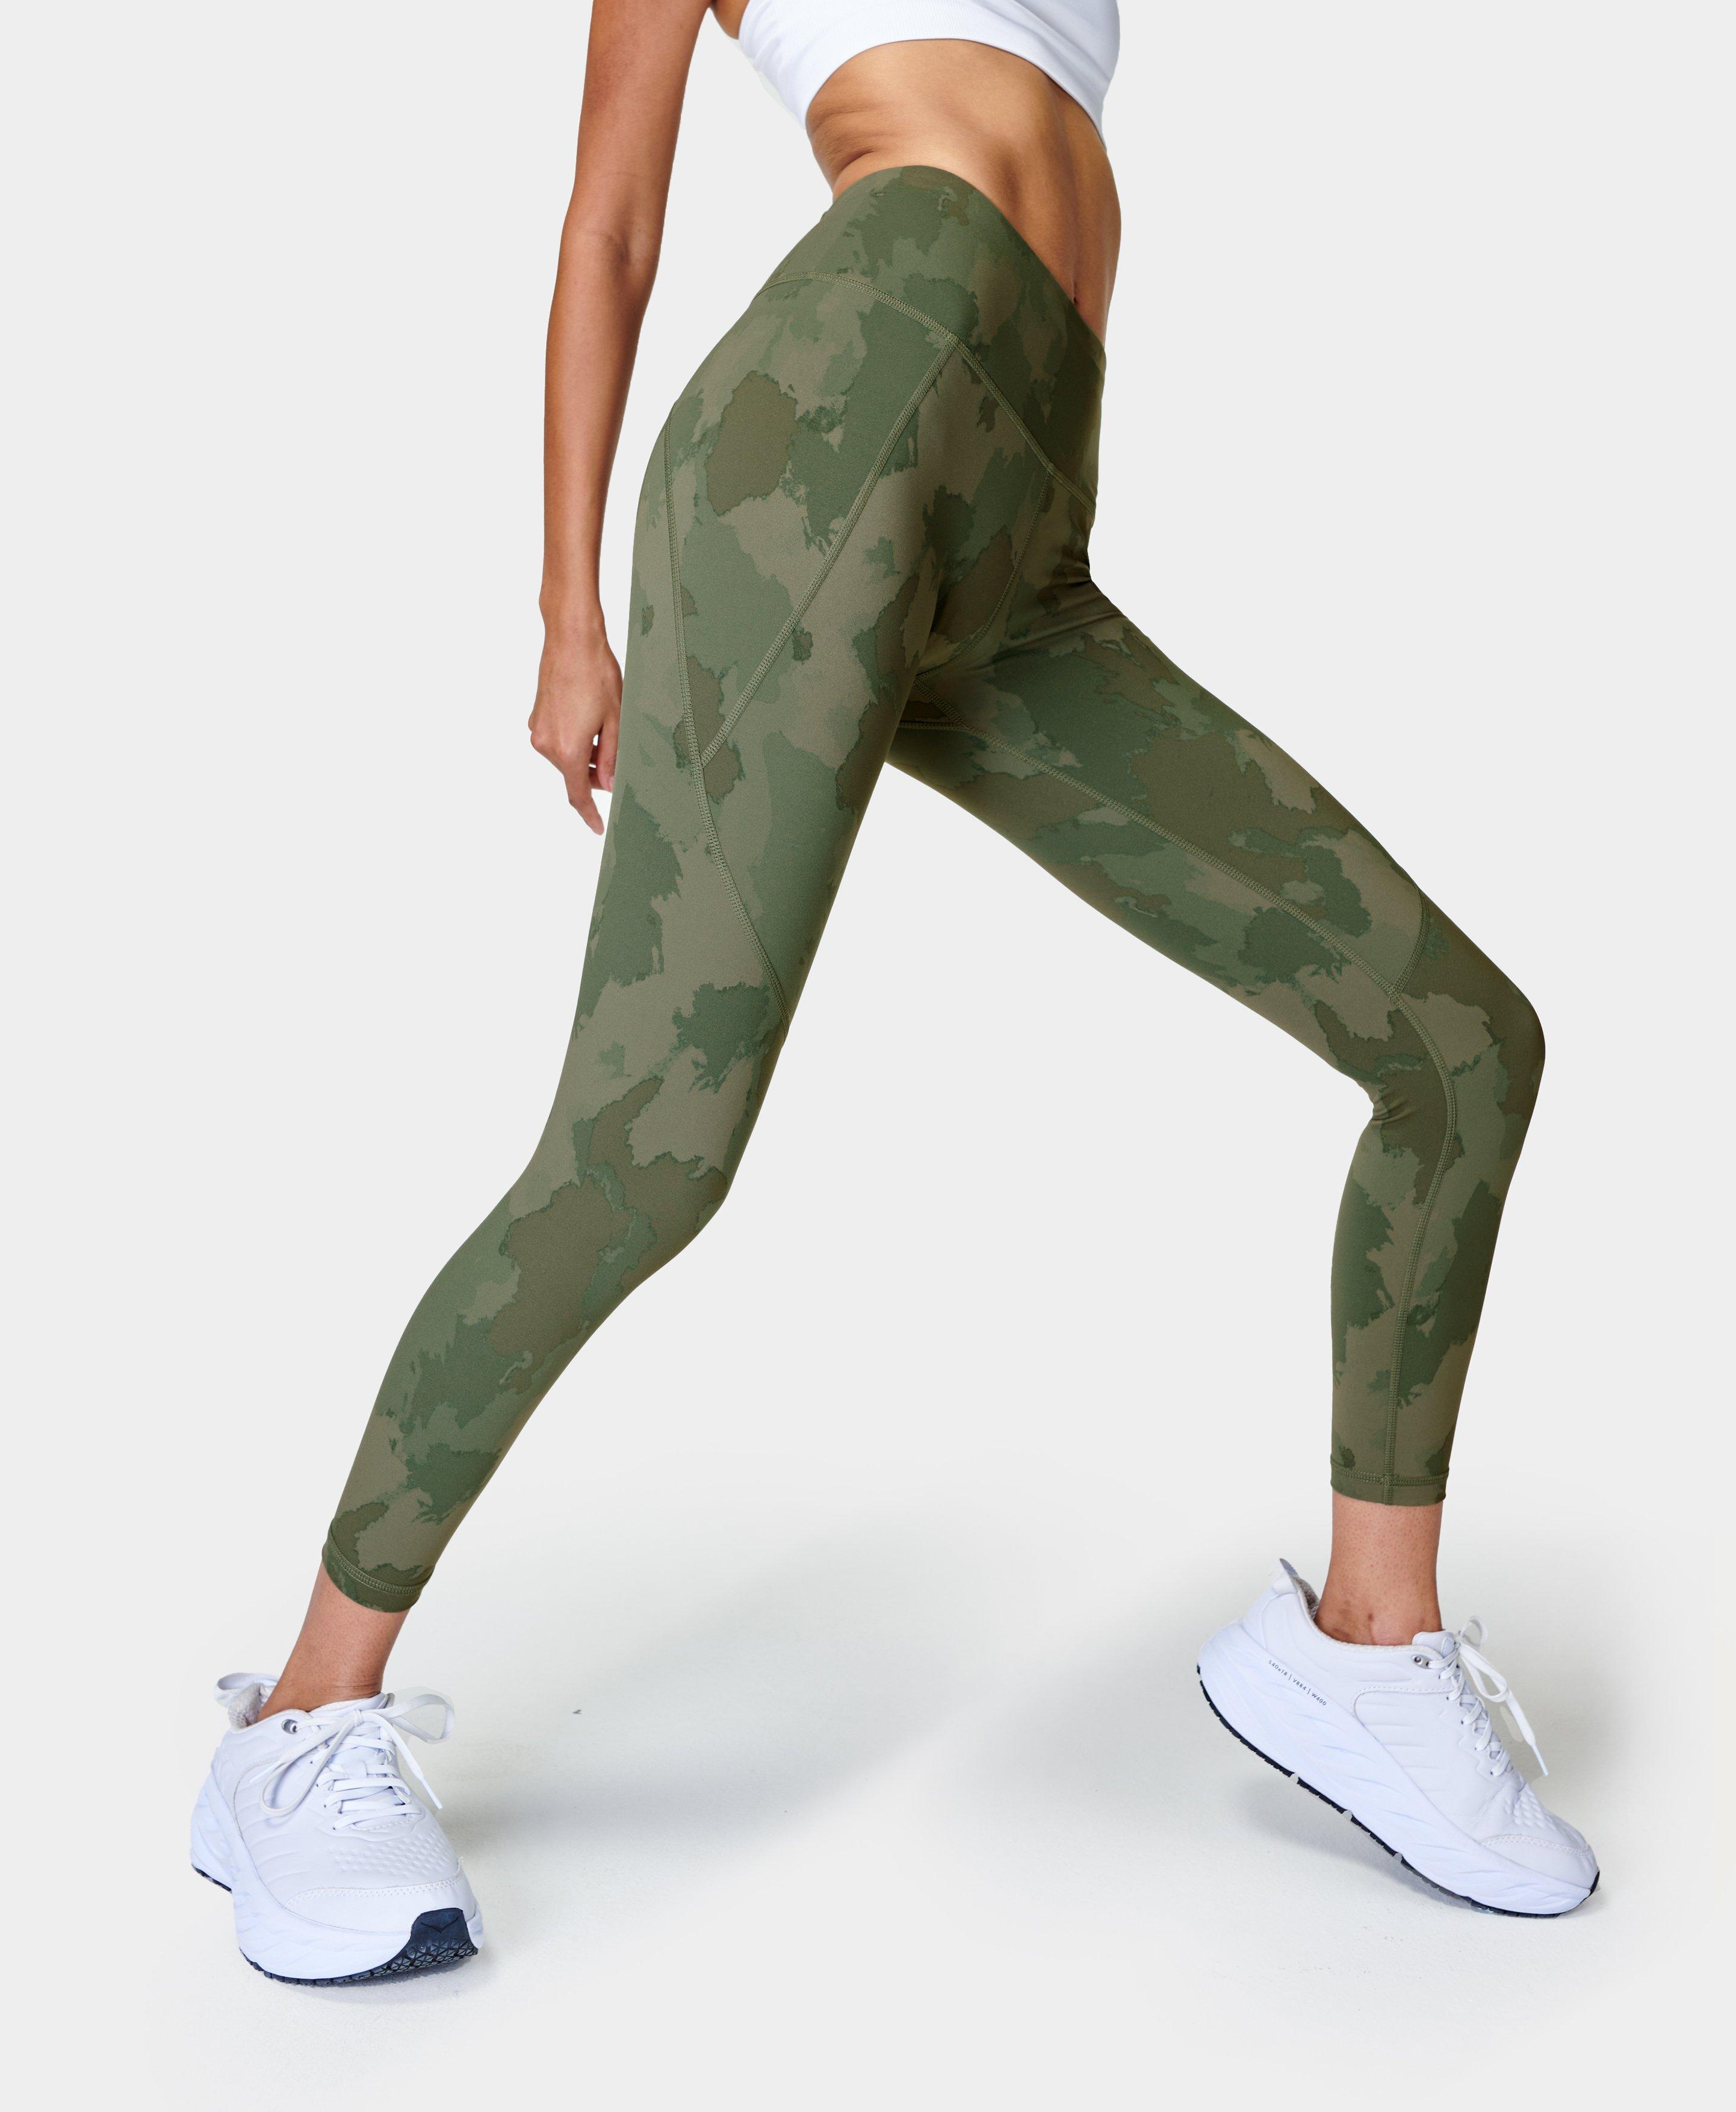 Savoy Active SA-XIALEG7307-BRN-GRN-L Virginia Camouflage Workout Leggings  for Women, Brown & Green - Large 